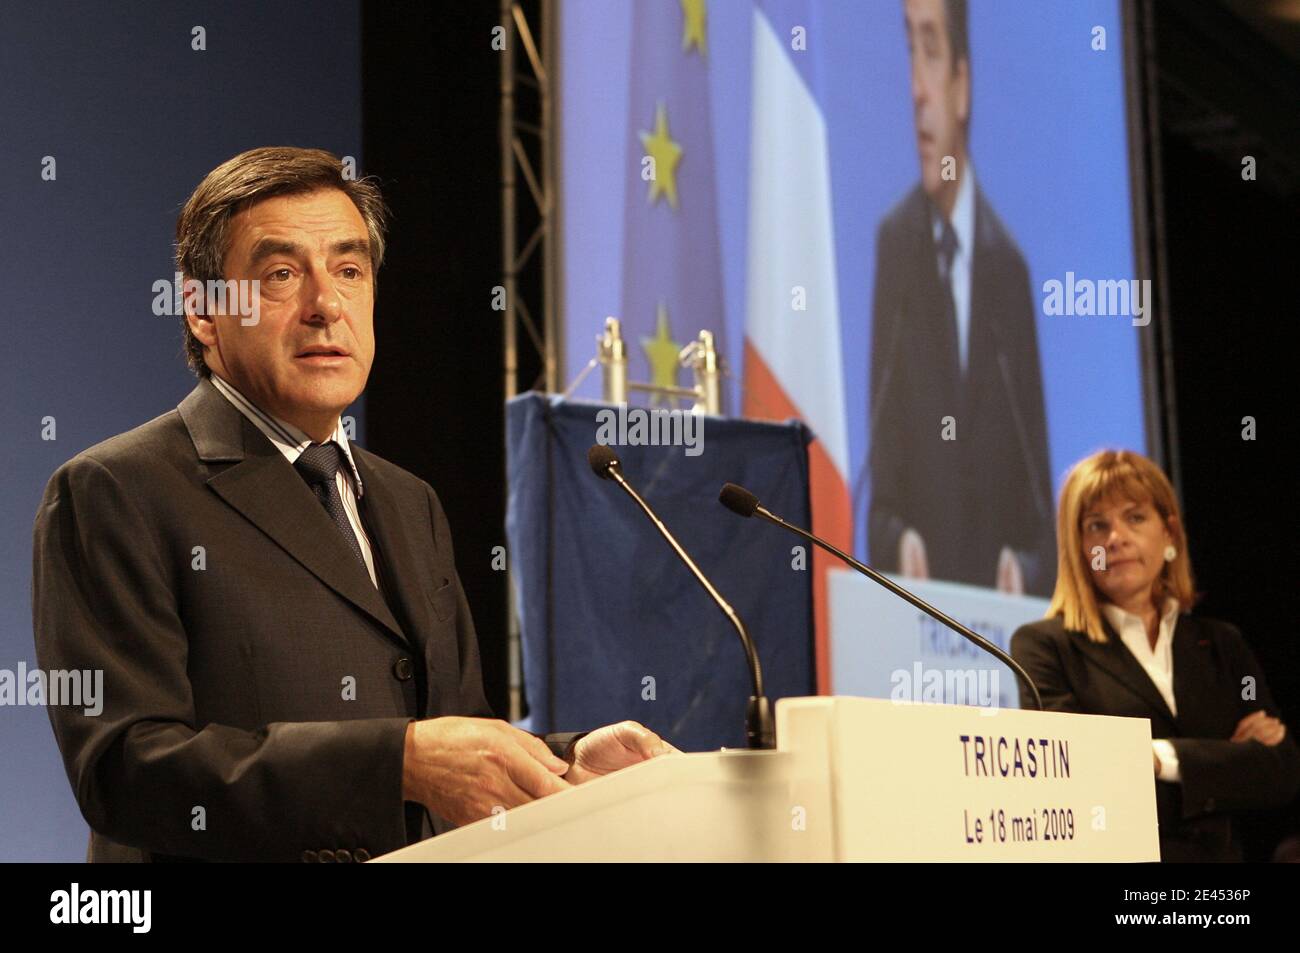 Prime minister Francois Fillon delivers a speech in presence of AREVA chief executive officer Anne Lauvergeon during the visit the French Areva power company Tricastin nuclear plant in Bollene, southeastern France, May 18, 2009. Photos by Vincent Dargent/ABACAPRESS.COM Stock Photo